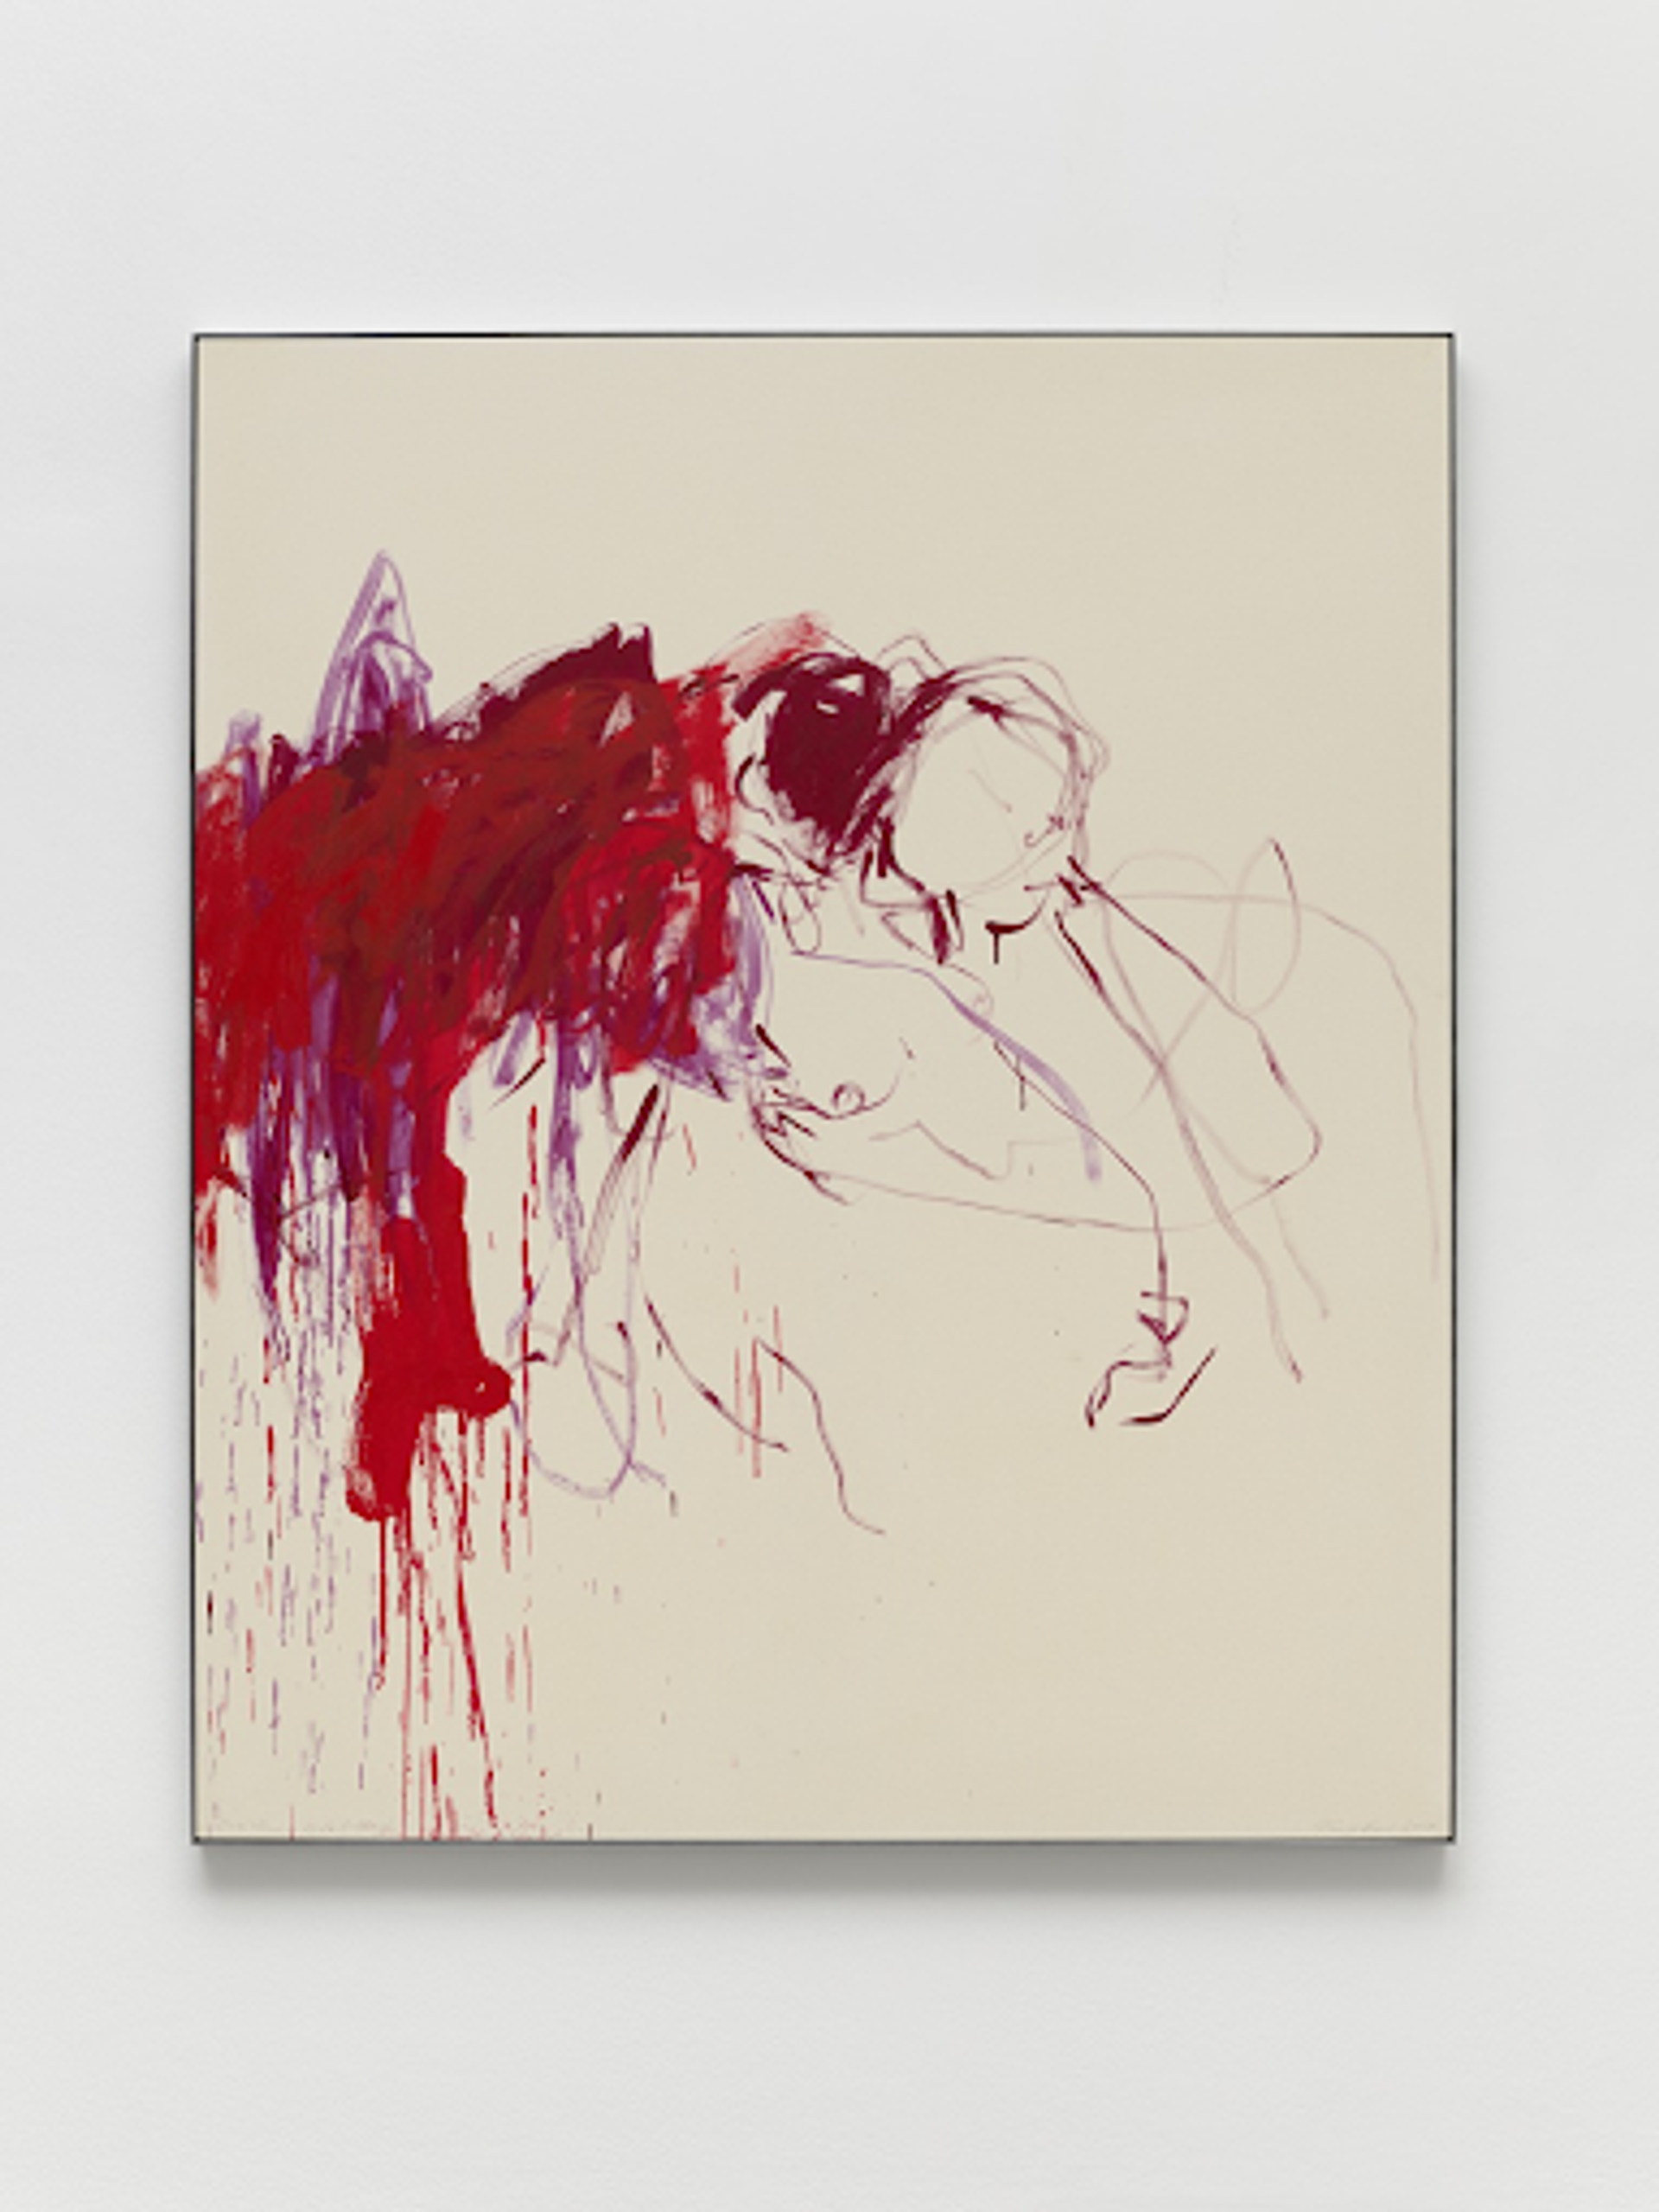 Tracey Emin’s Only Room In My Mind For You. Abstract painting of two figures, one female and nude. Red and purple paint beside the two figures.